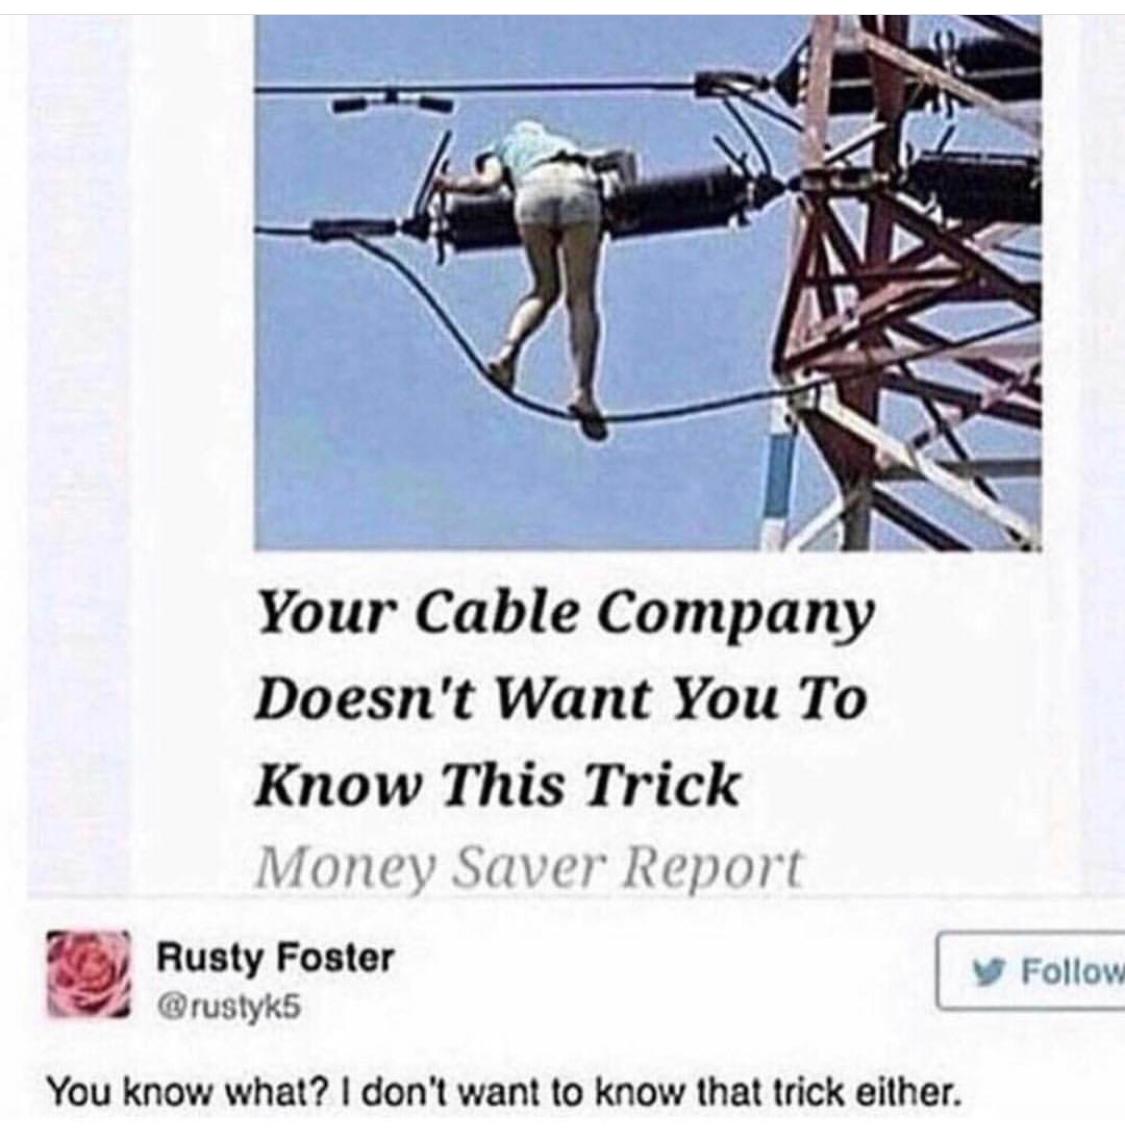 memes - your cable company doesn t want you - Your Cable Company Doesn't Want You To Know This Trick Money Saver Report Rusty Foster To y You know what? I don't want to know that trick either.